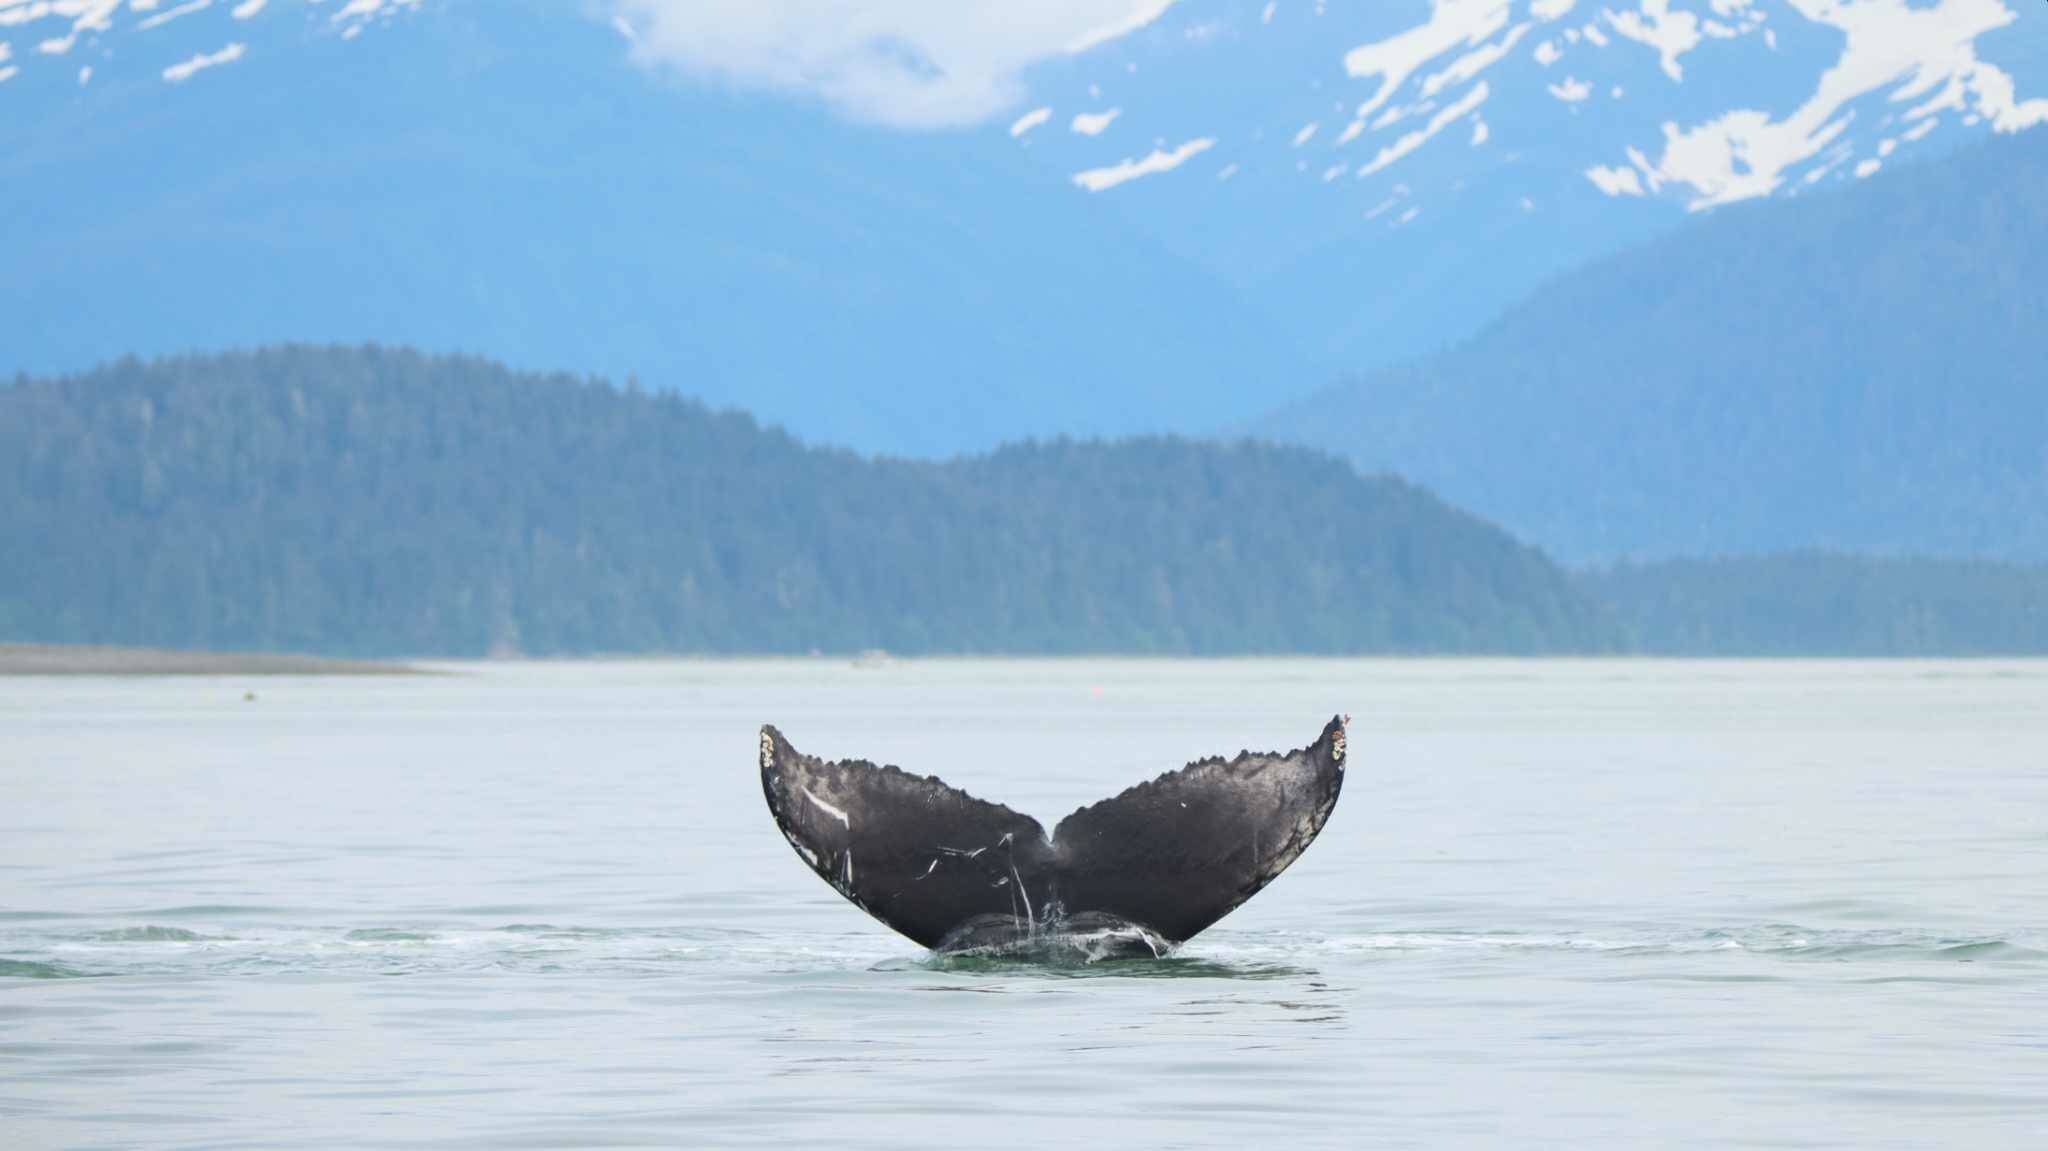 This is a photo of the fluke of “Tango,” a humpback whale calf that was found dead on an island near Juneau in late August. (Courtesy / Bri Pettie)